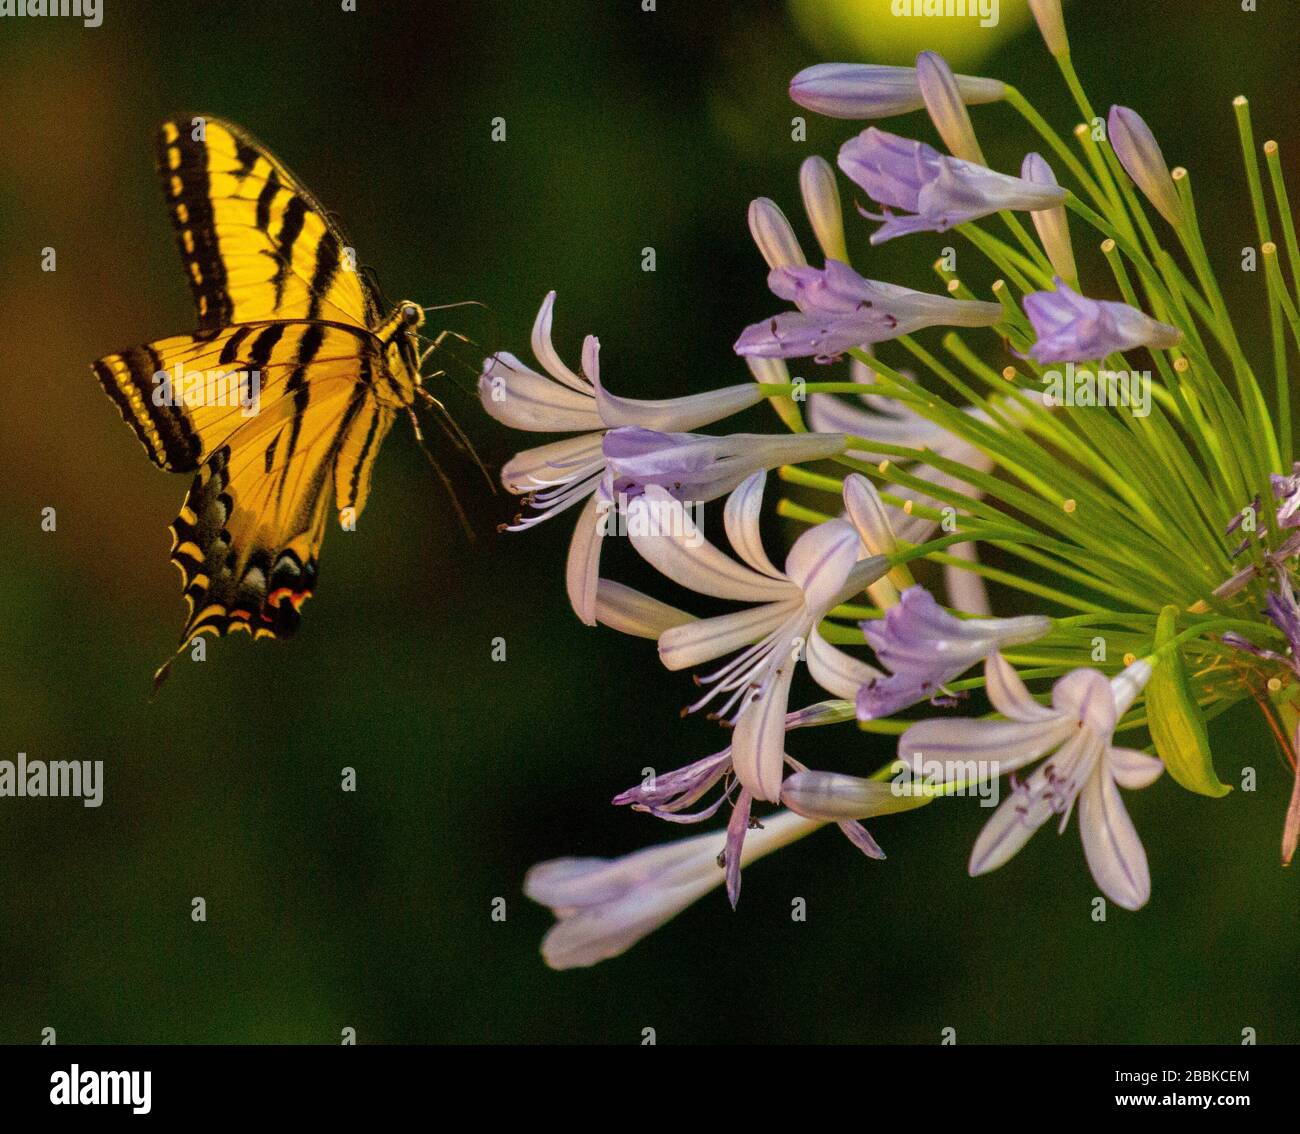 A yellow and black swallowtail butterfly lands on a purple flower Stock Photo